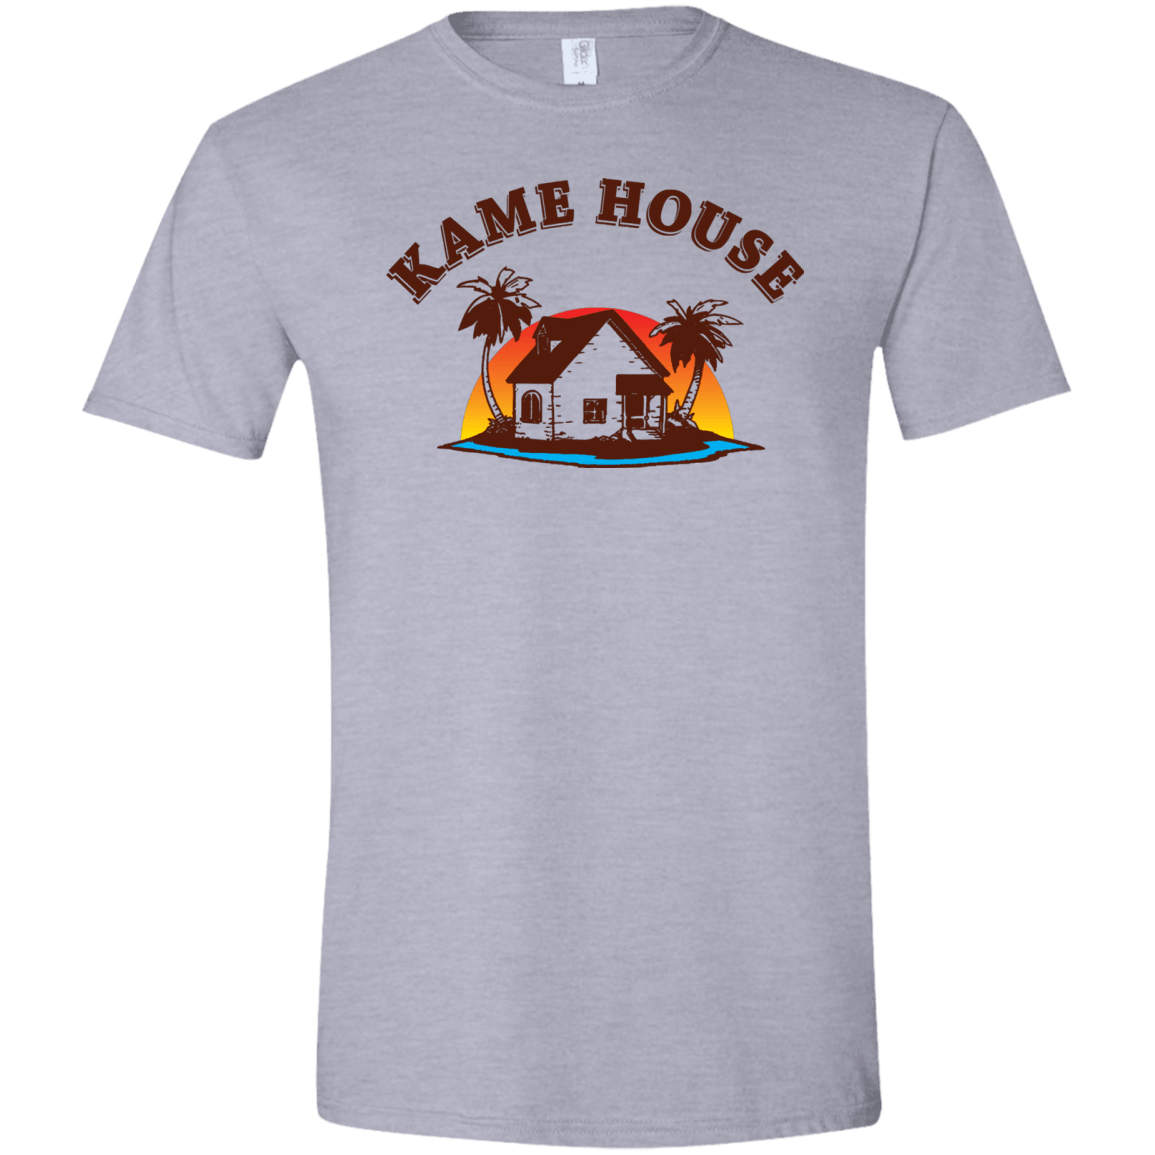 T-Shirts Sport Grey / X-Small Kame House Men's Semi-Fitted Softstyle